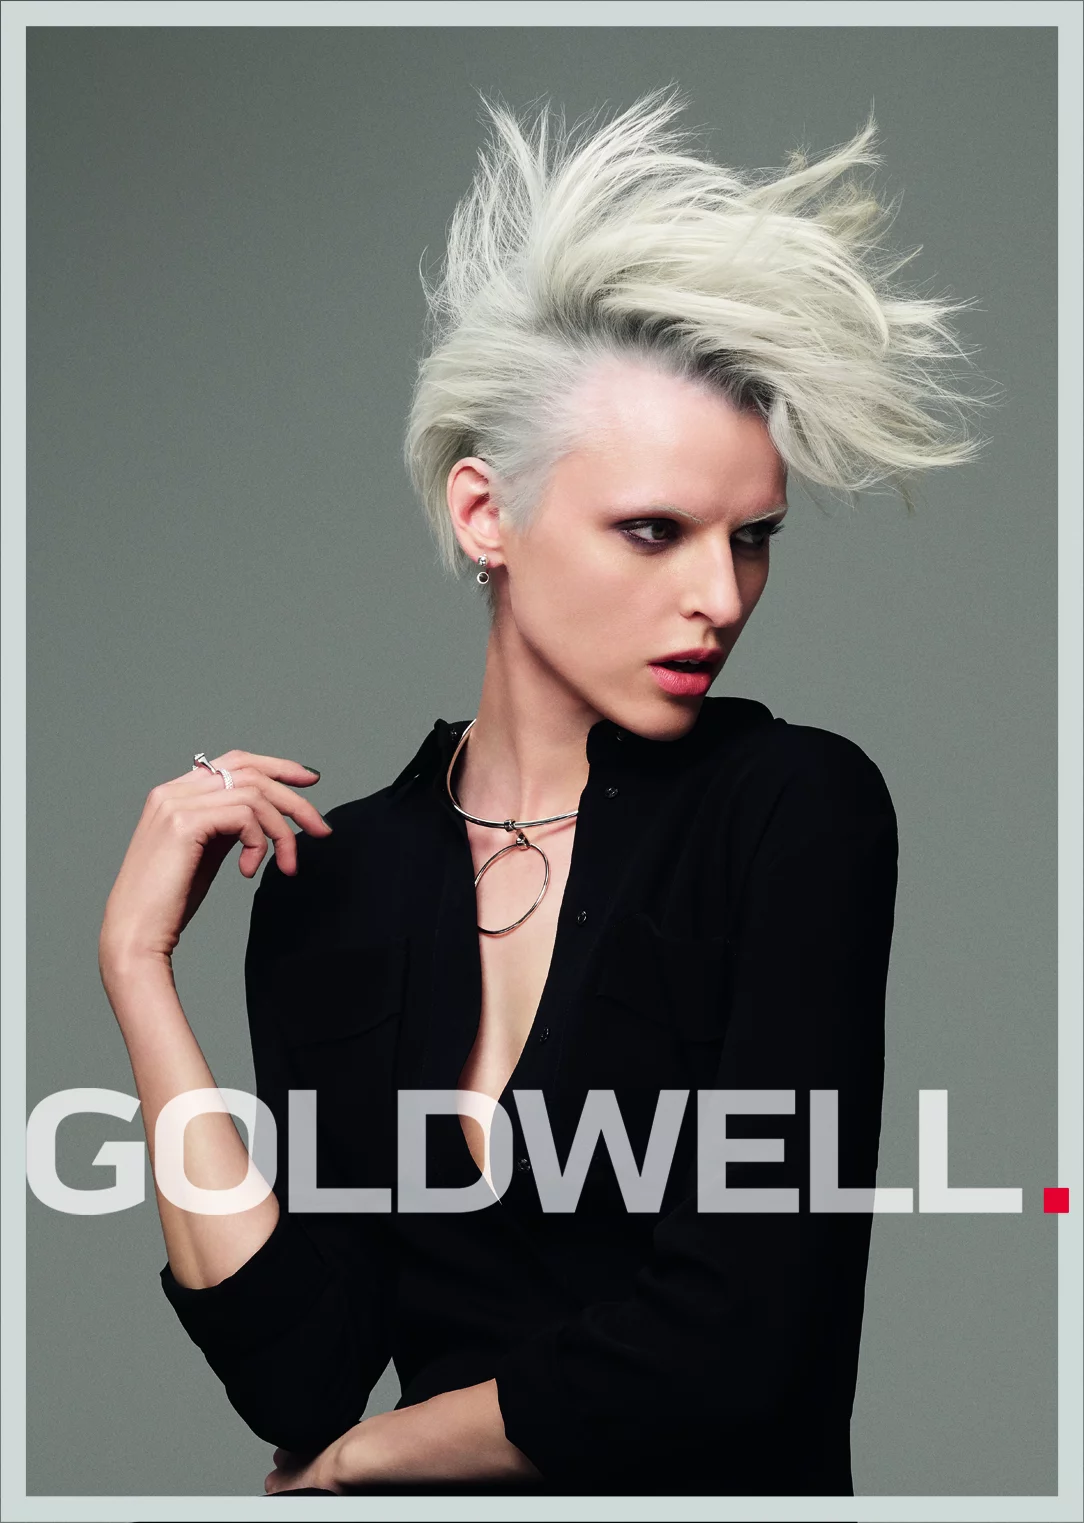 Goldwell 2 by Ralph MECKE